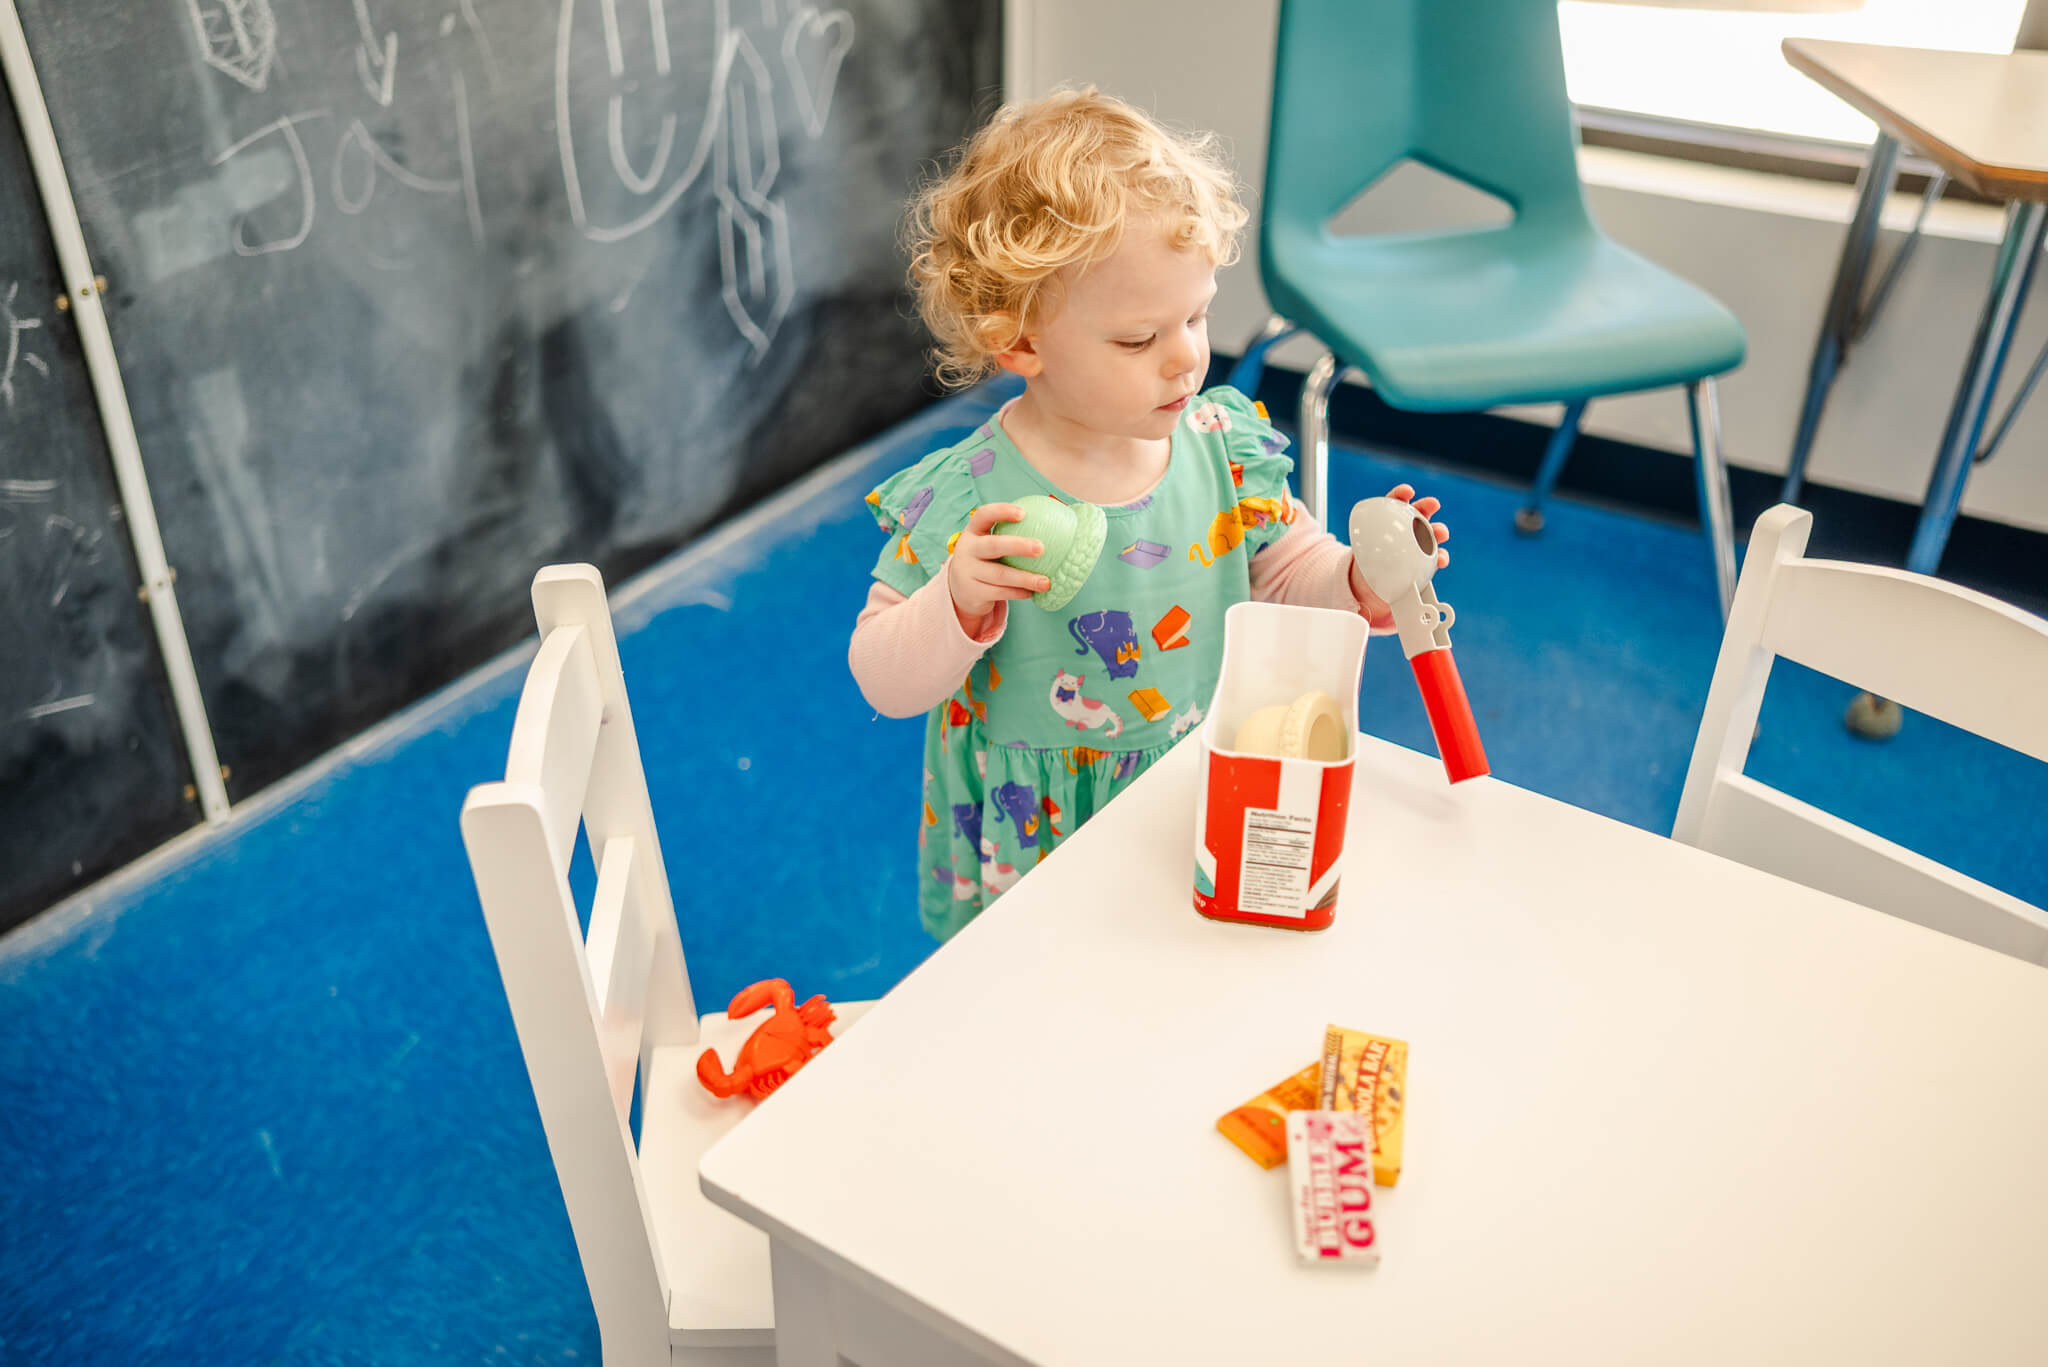 A toddler wearing a teal dress with cats plays at a white table. She is doing the kind of child-centered exploratory play taught at Chesapeake Montessori School.